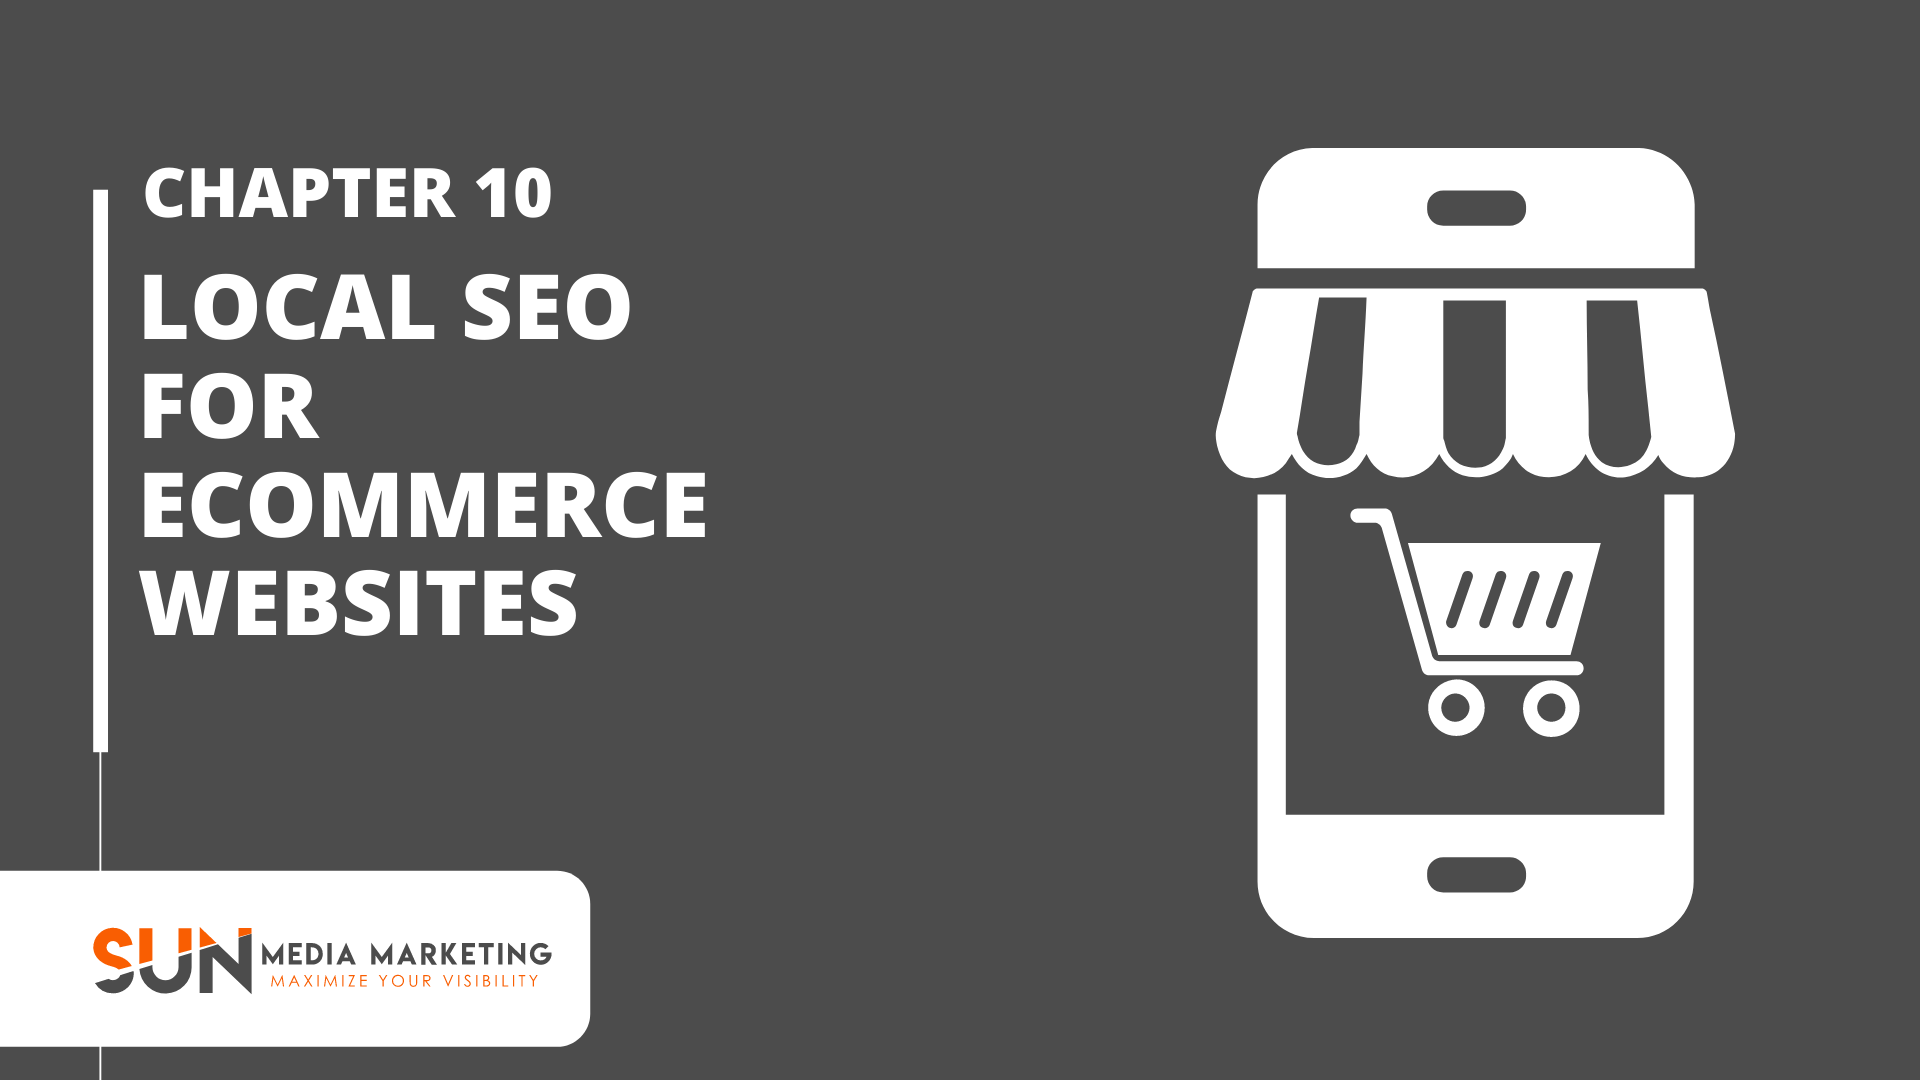 Things You Should Know About Local SEO for eCommerce Websites